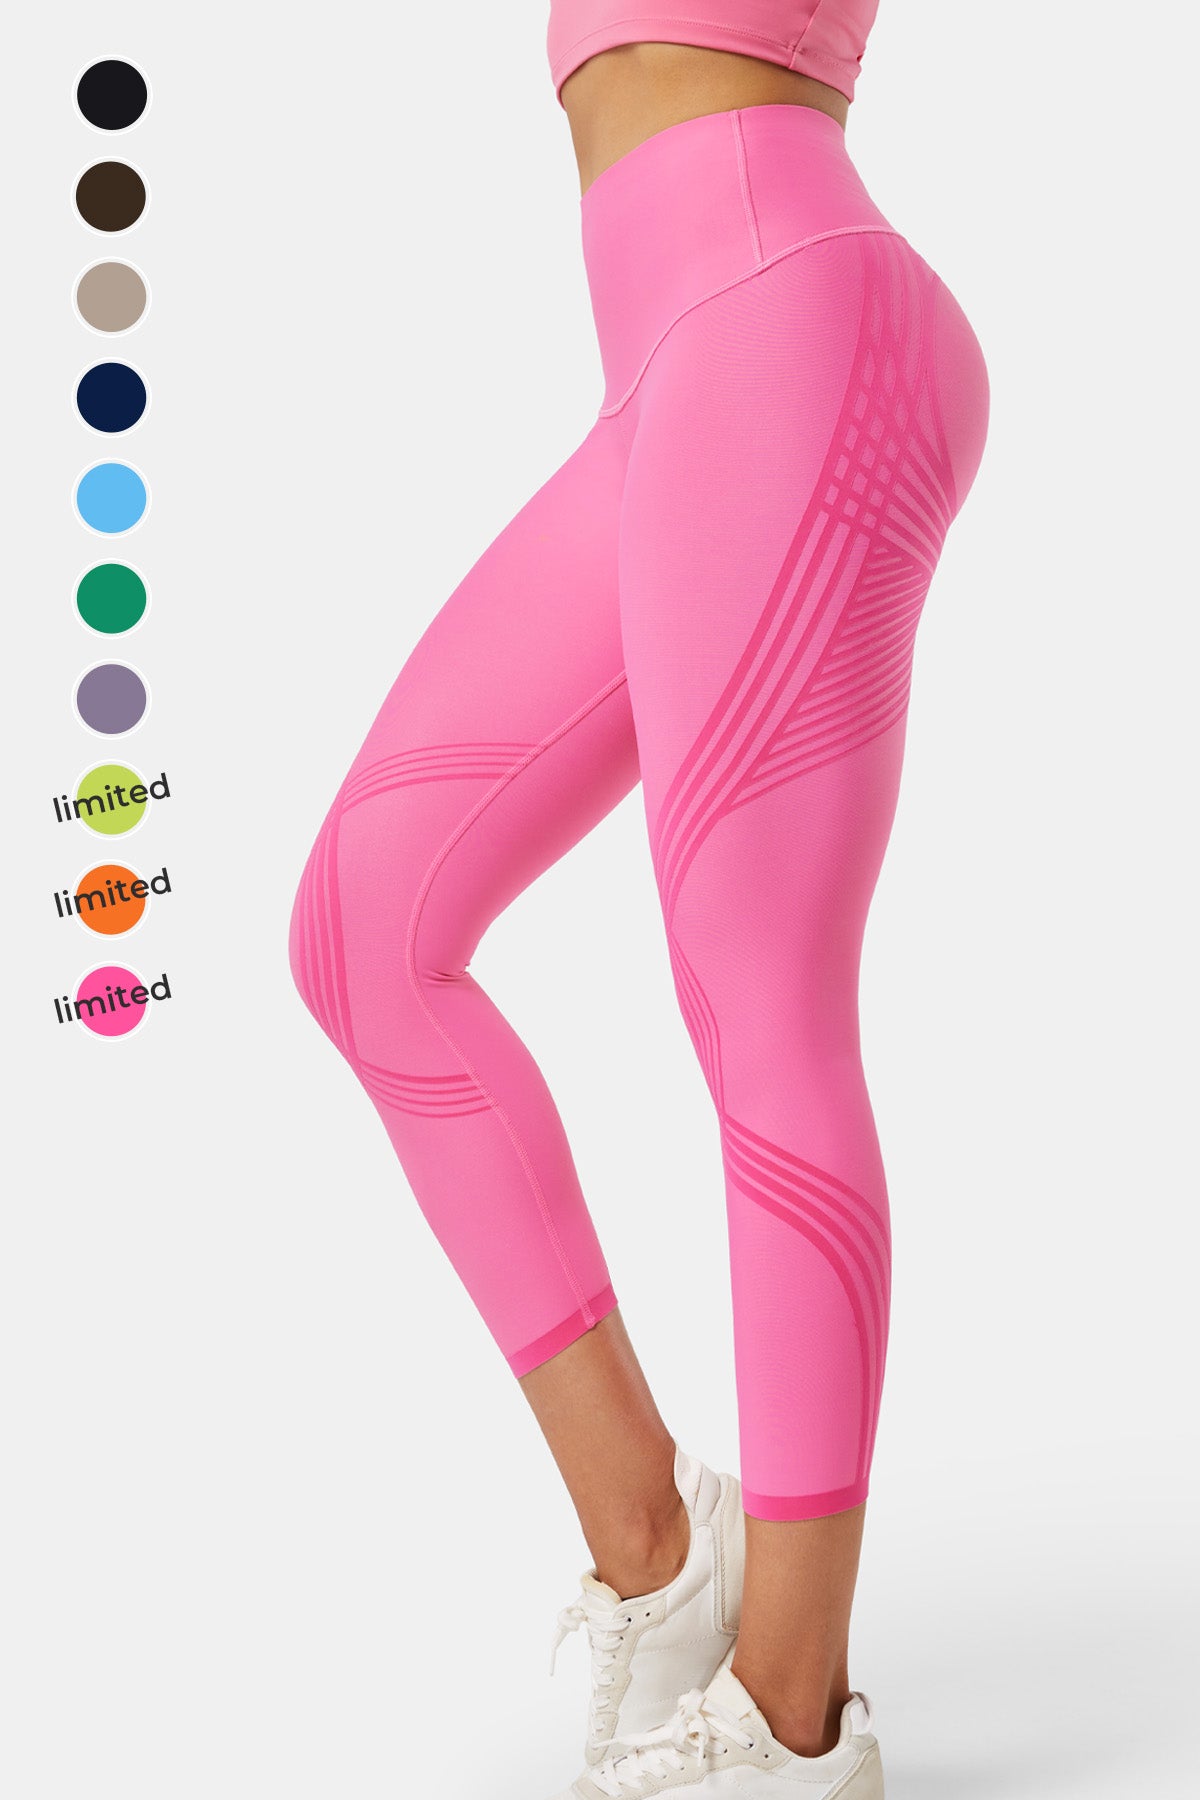 Baked Apple-Those Internet-Famous Compression Leggings That Can Smooth